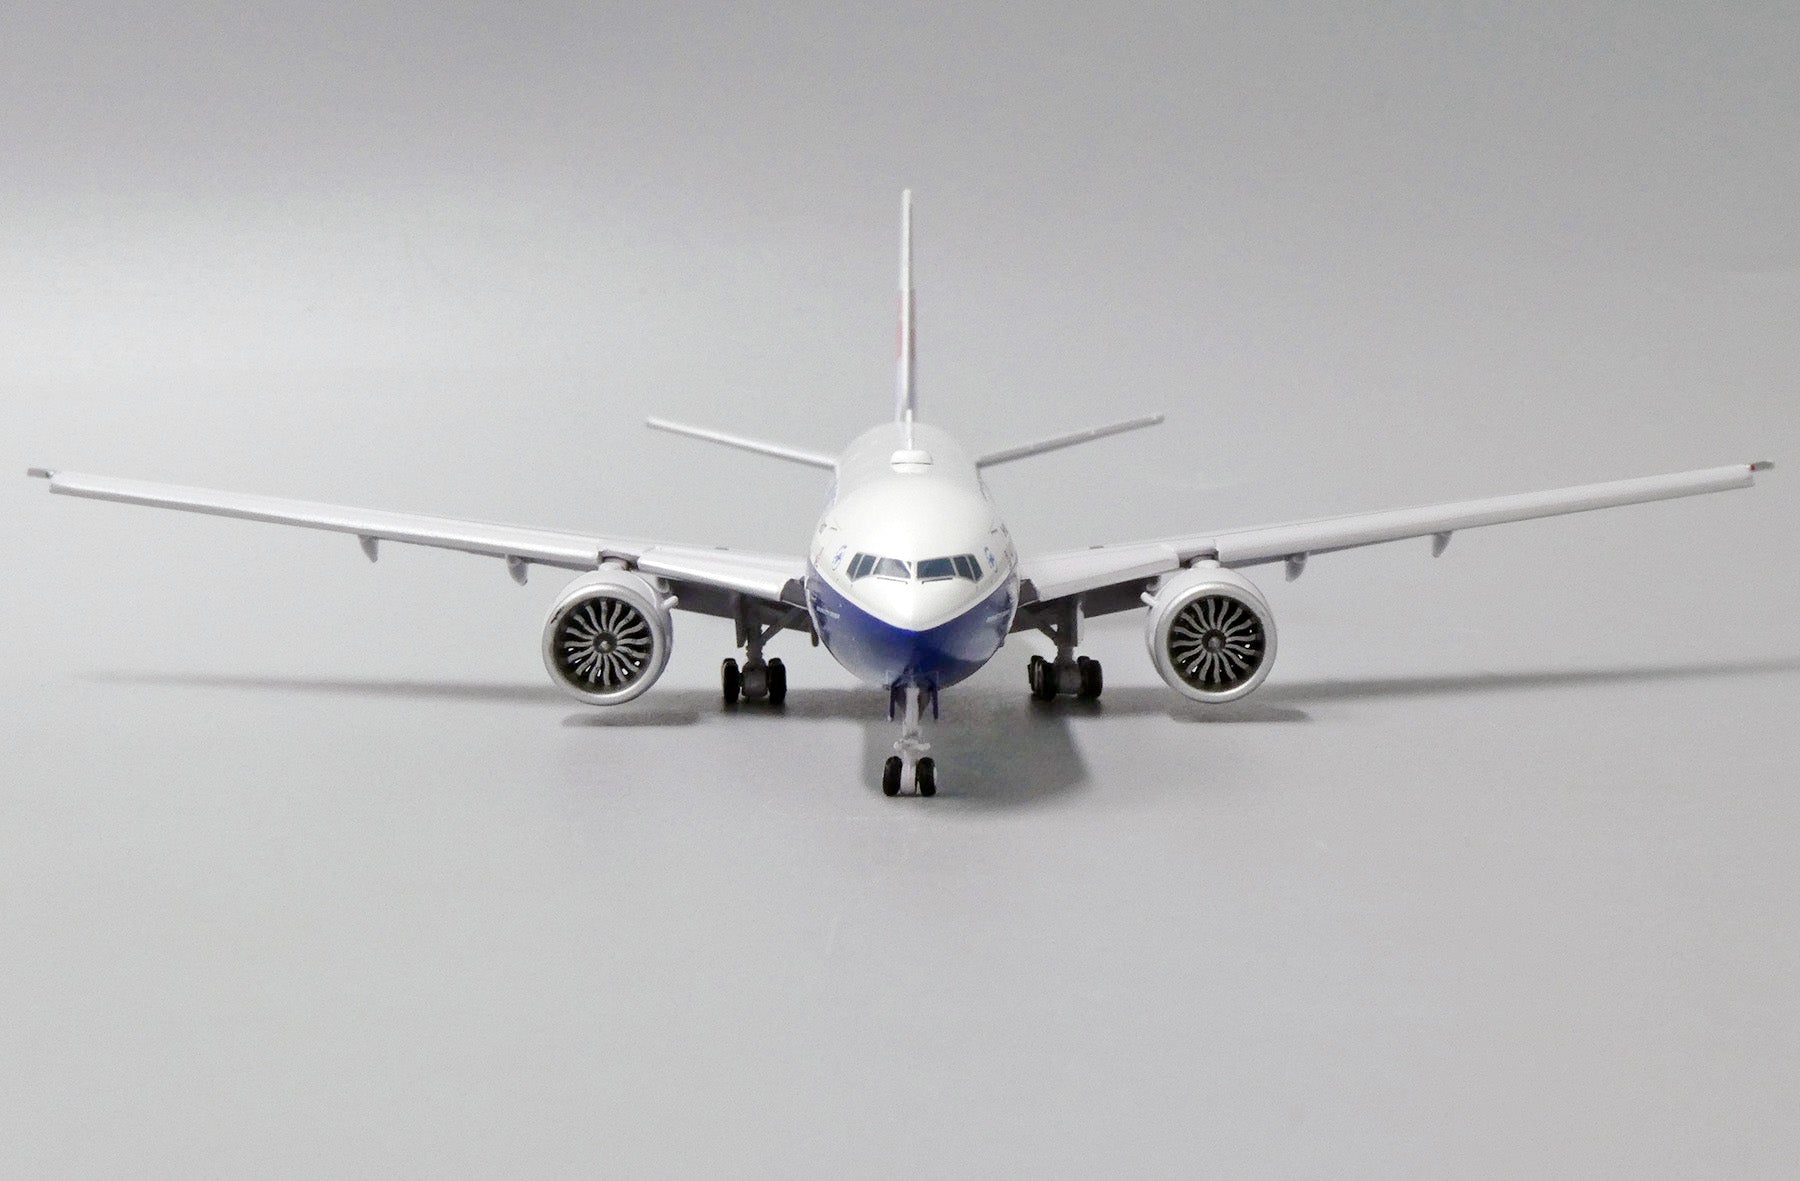 *1/400 China Airlines B 777-300ER 